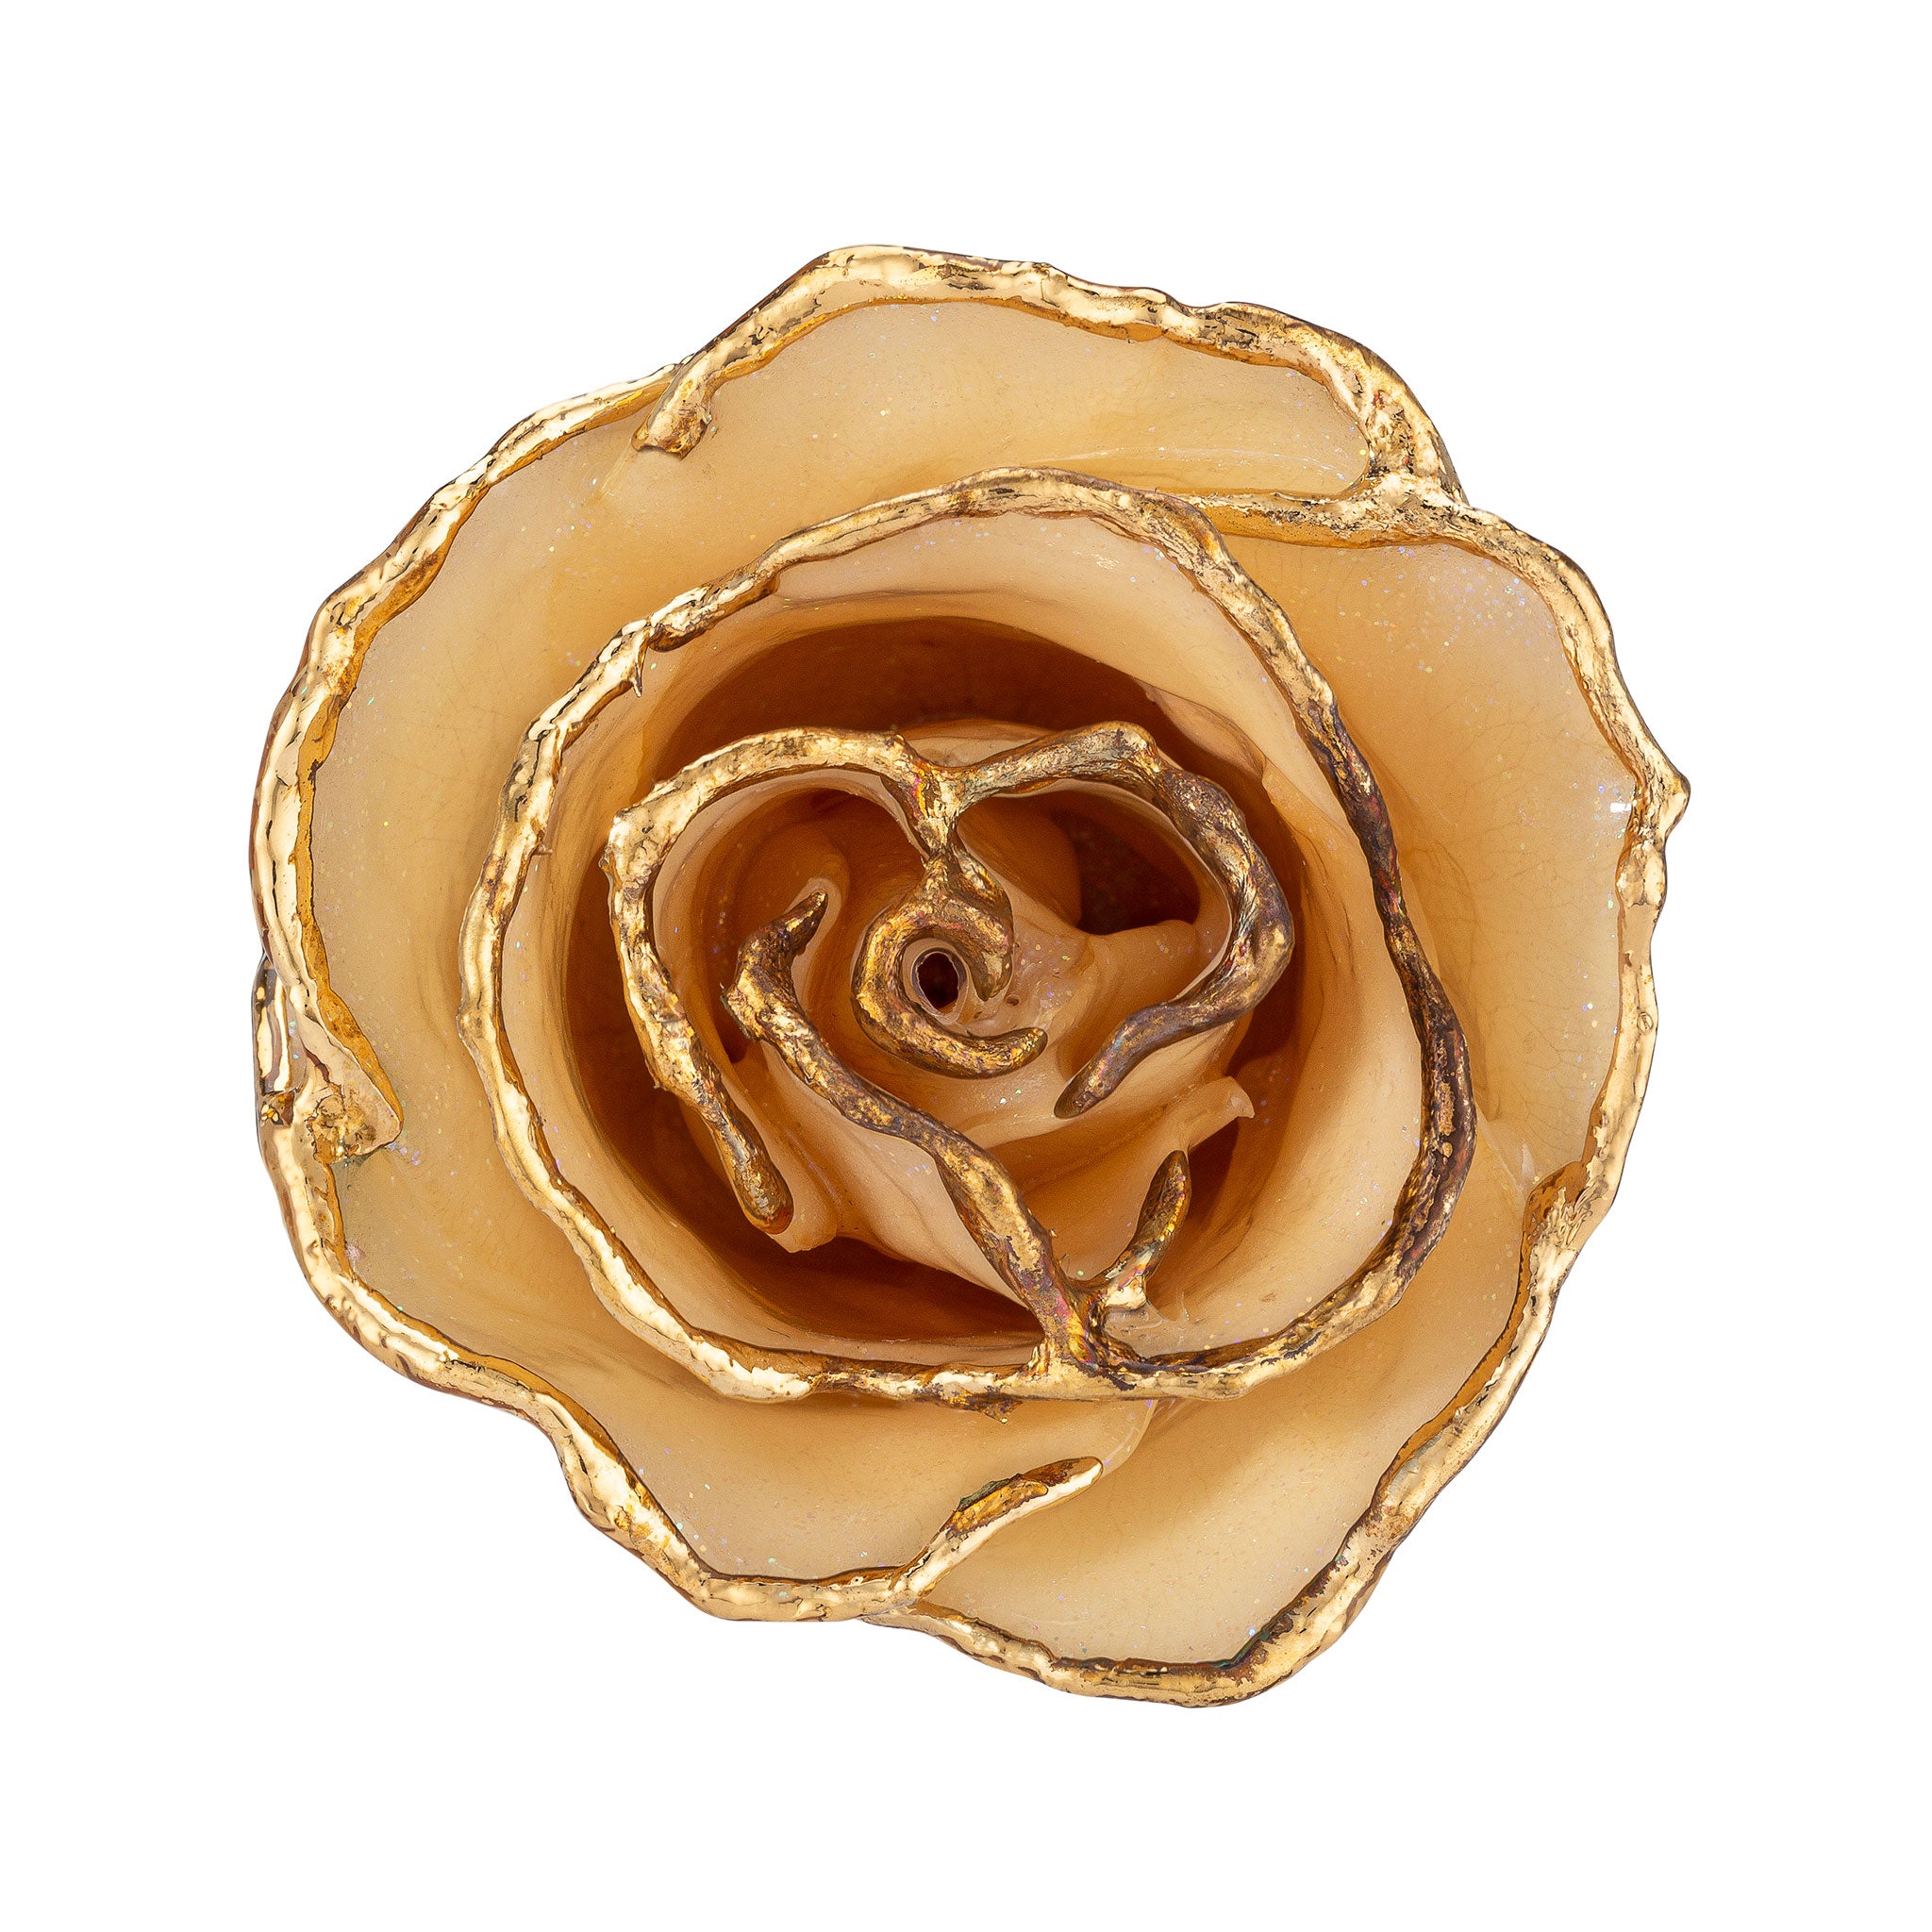 24K Gold Trimmed Forever Rose with Diamond Petals with Sparkles. View of Stem, Leaves, and Rose Petals and Showing Detail of Gold Trim View From the top 